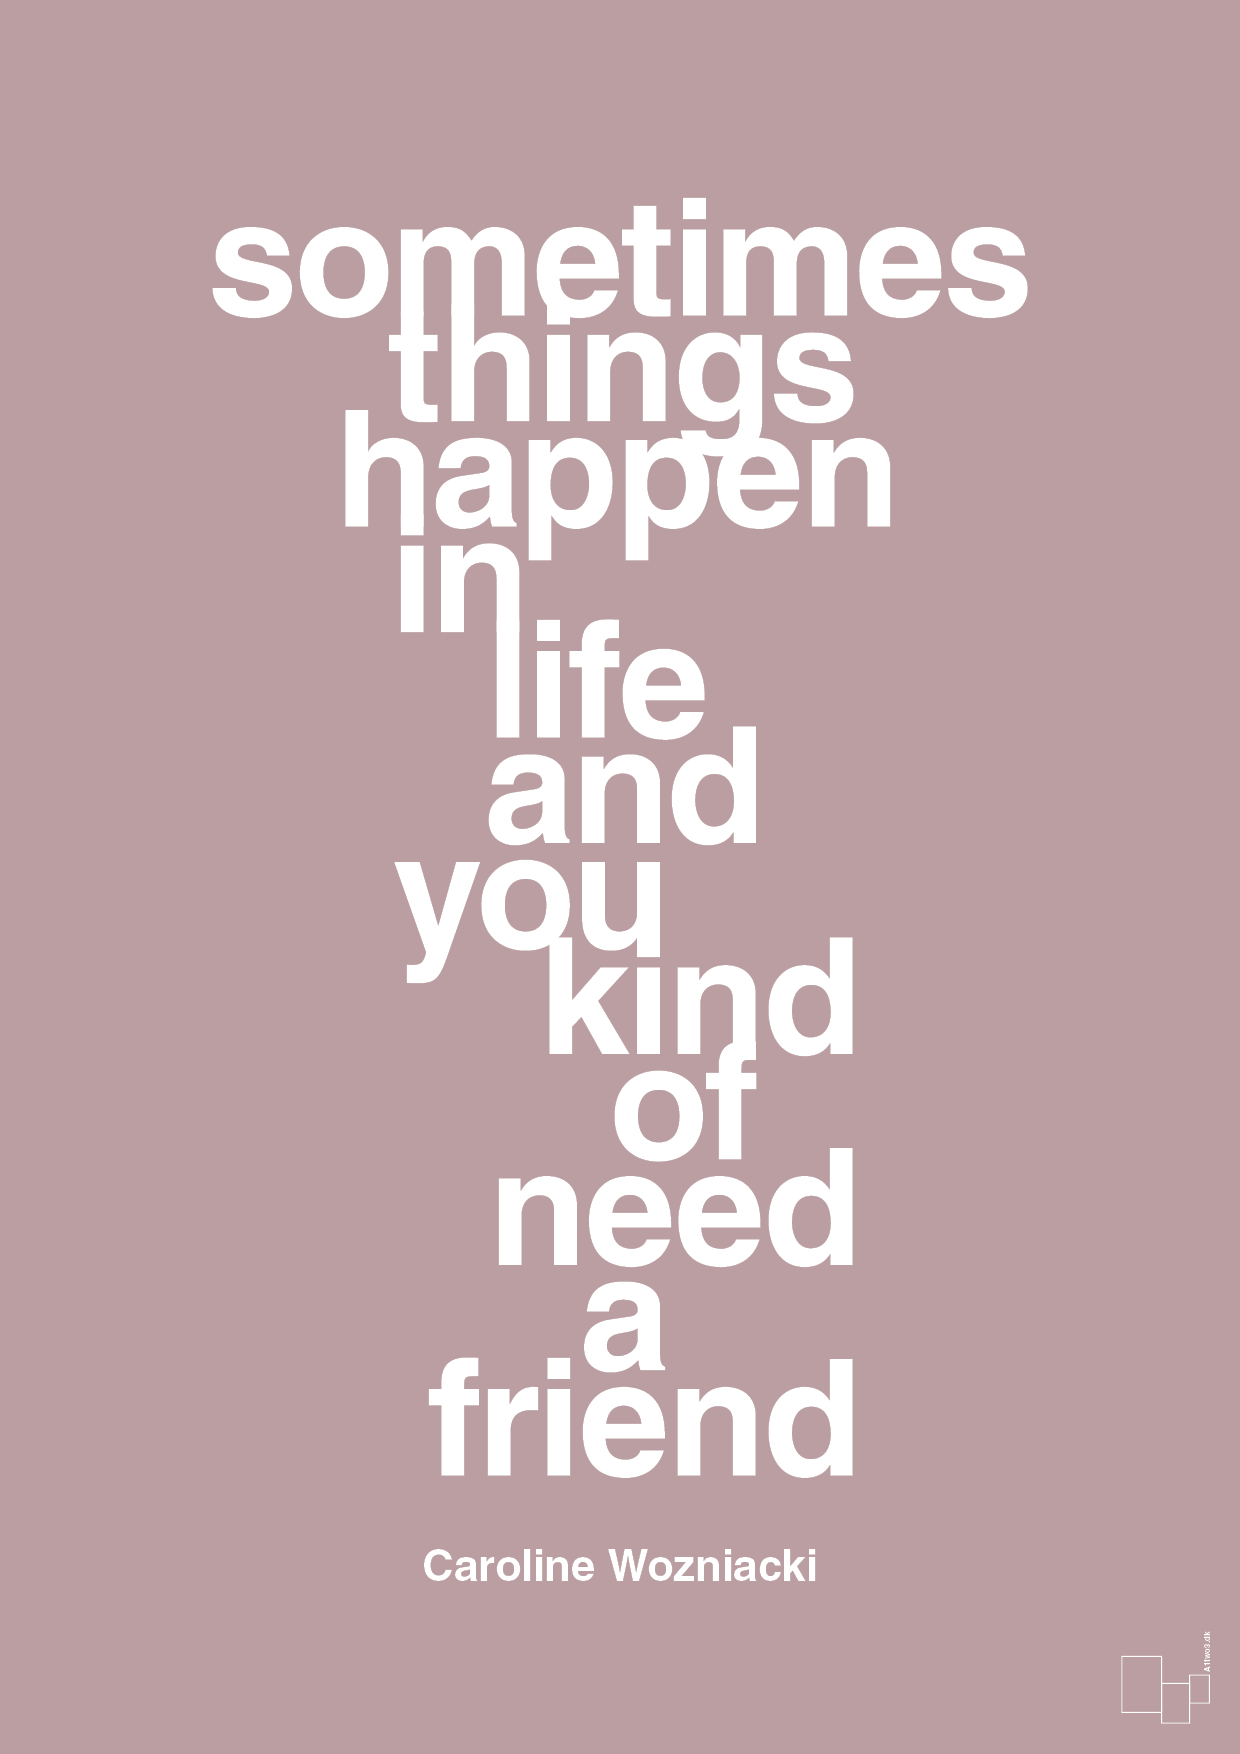 sometimes things happen in life and you kind of need a friend - Plakat med Citater i Light Rose